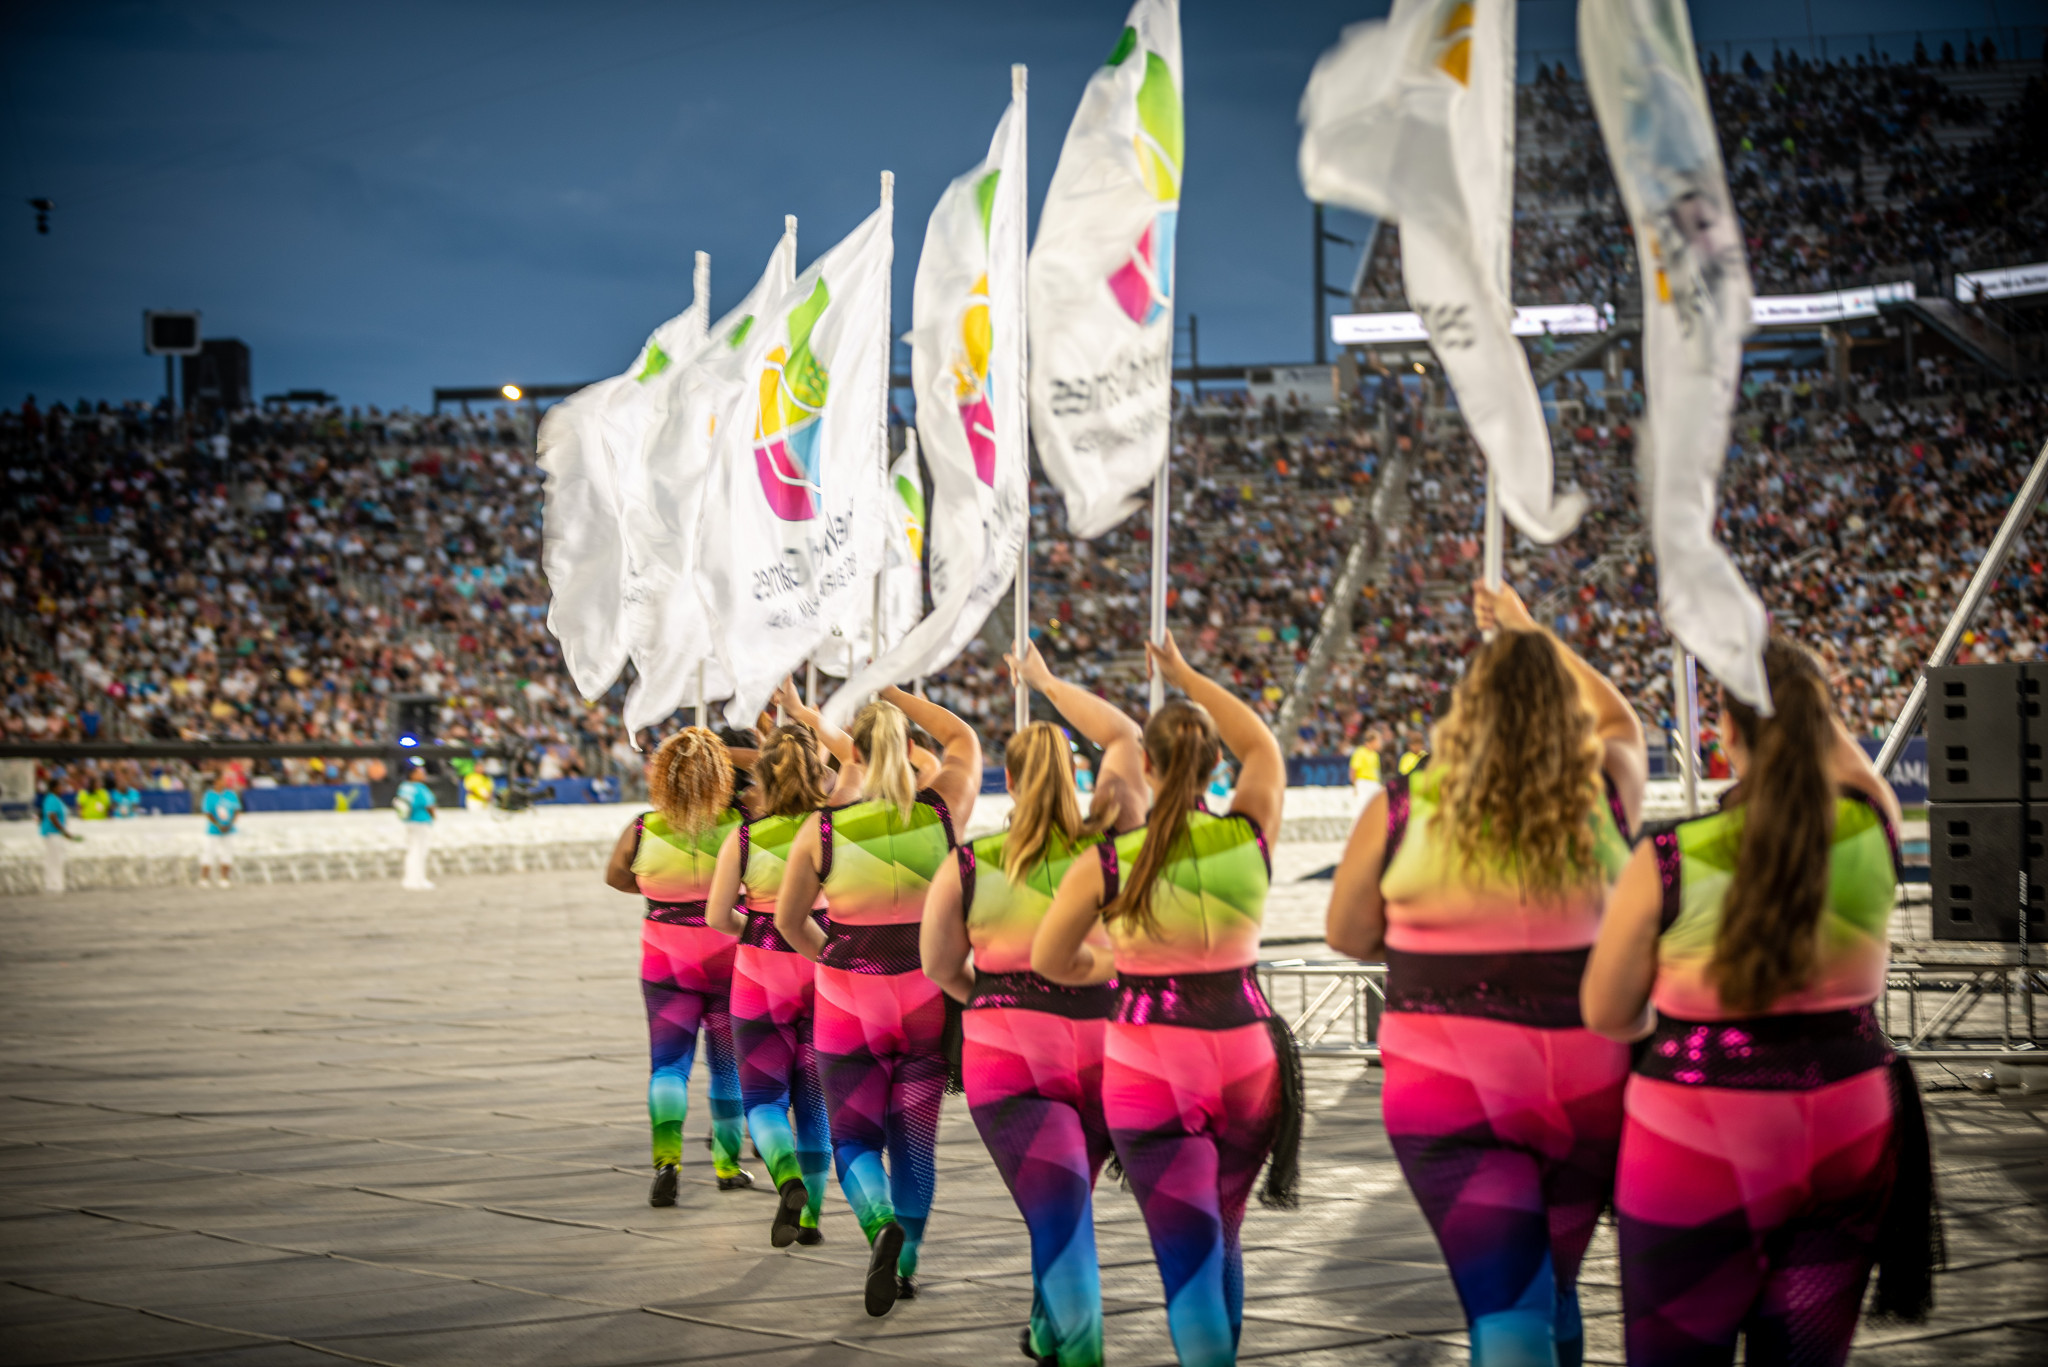 The World Games have finally opened in Birmingham in Alabama after postponement last year due to COVID-19 ©The World Games 2022